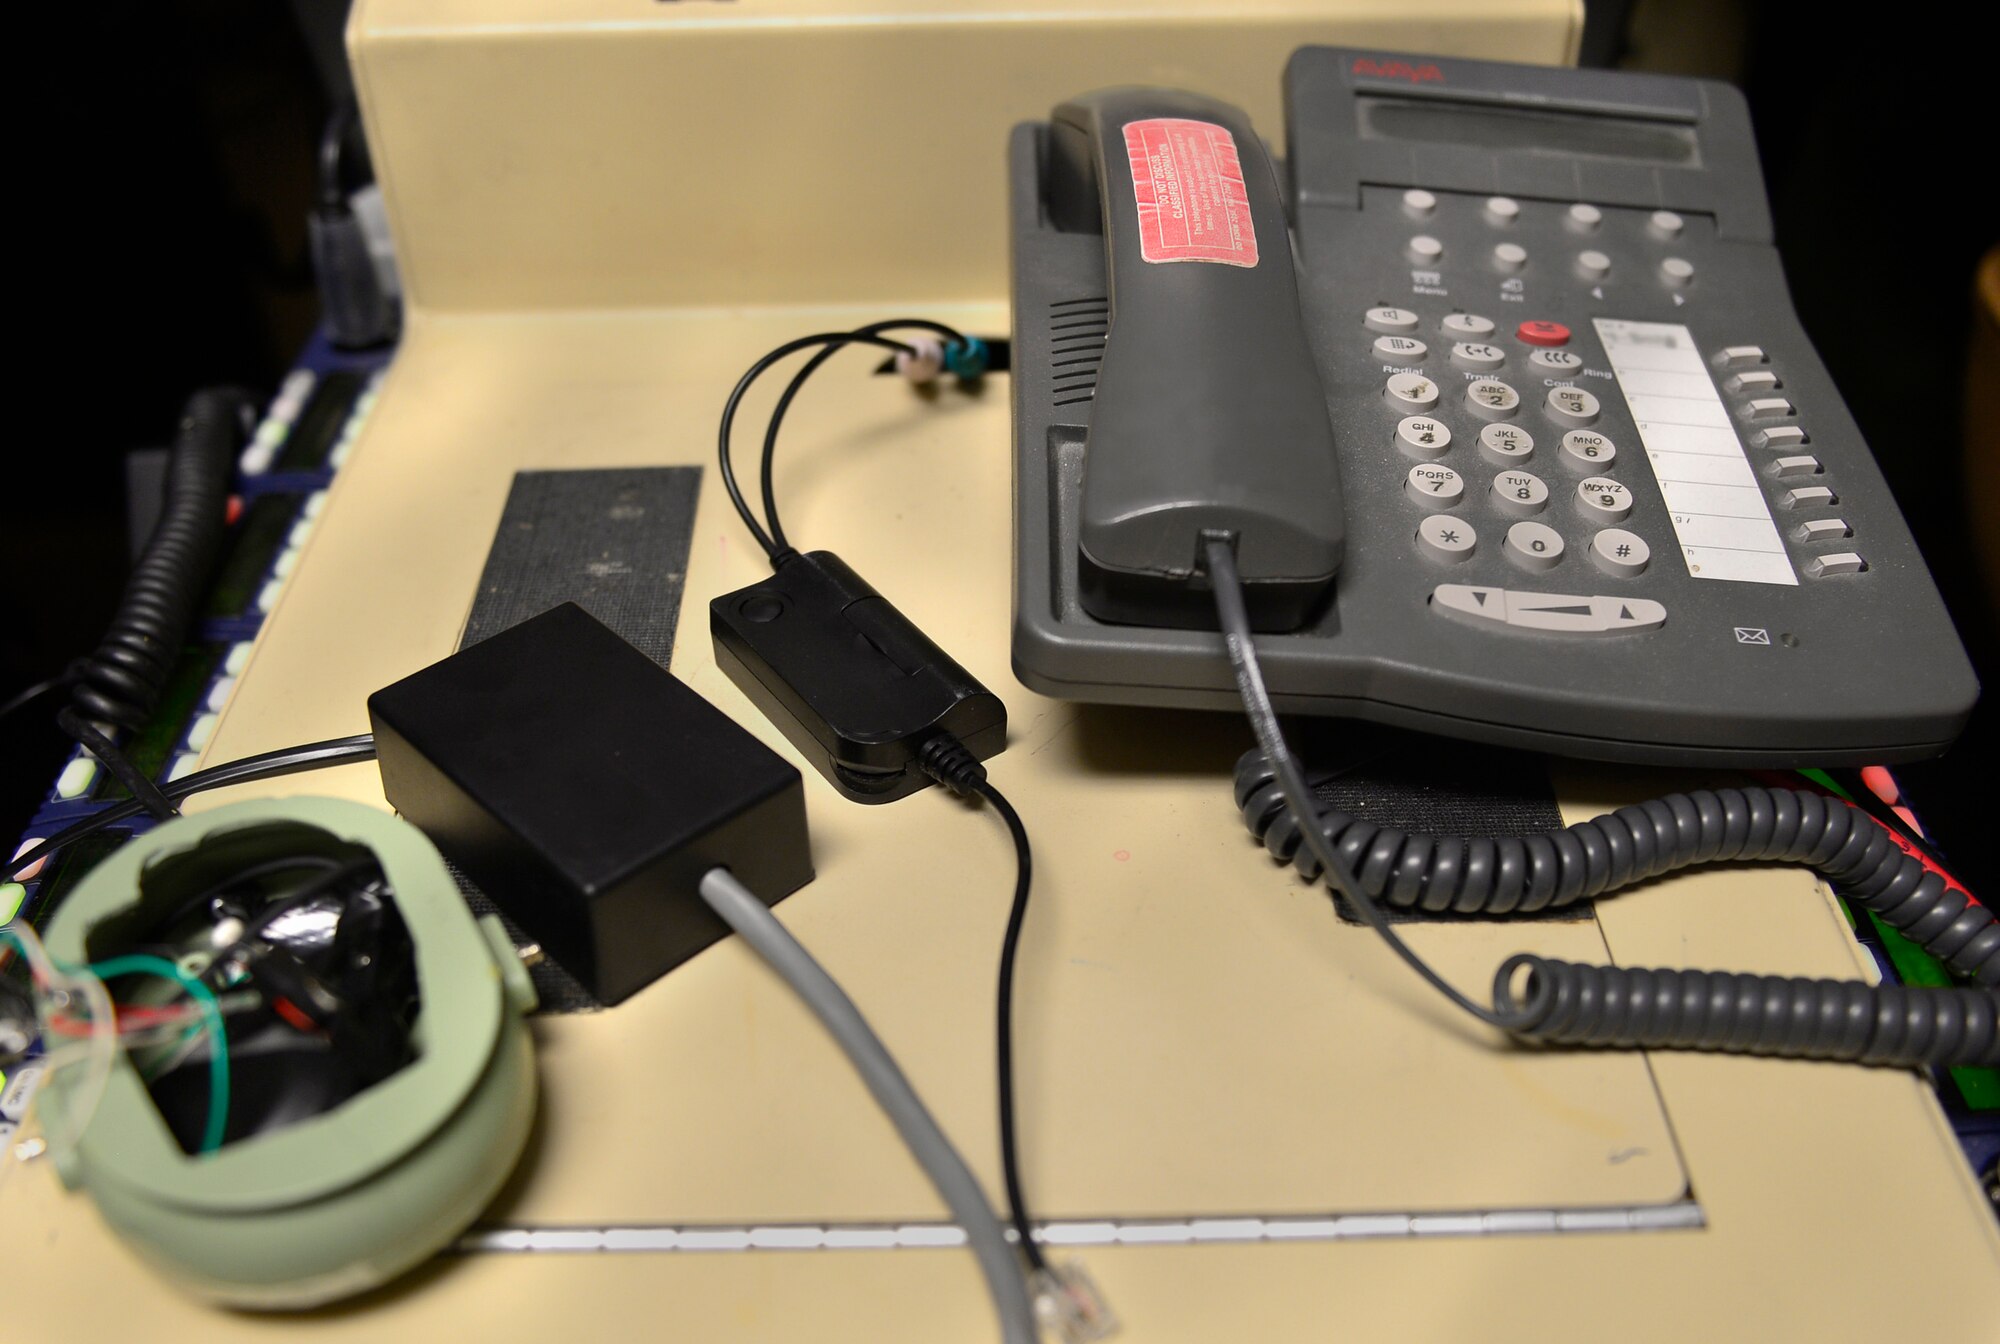 From left to right, the Frankenphone, the Frankenphone 2.0 and the headset connector are displayed June 12, 2017, at Creech Air Force Base, Nev. The Frankenphone has filled a gap for a long term solution to communications deficiencies by routing calls from the joint terminal attack controllers to the telephone and patching it into the aircrew’s headsets. This has allowed MQ-9 aircrews to properly receive weapons strike guidance from the ground forces to take the fight to the enemy. The Frankenphone 2.0 offered improved durability and sound clarity while the headset connector is an evolution of the Frankenphone which is already integrated in the Audio Multi Level System. (U.S. Air Force photo/Senior Airman Christian Clausen)